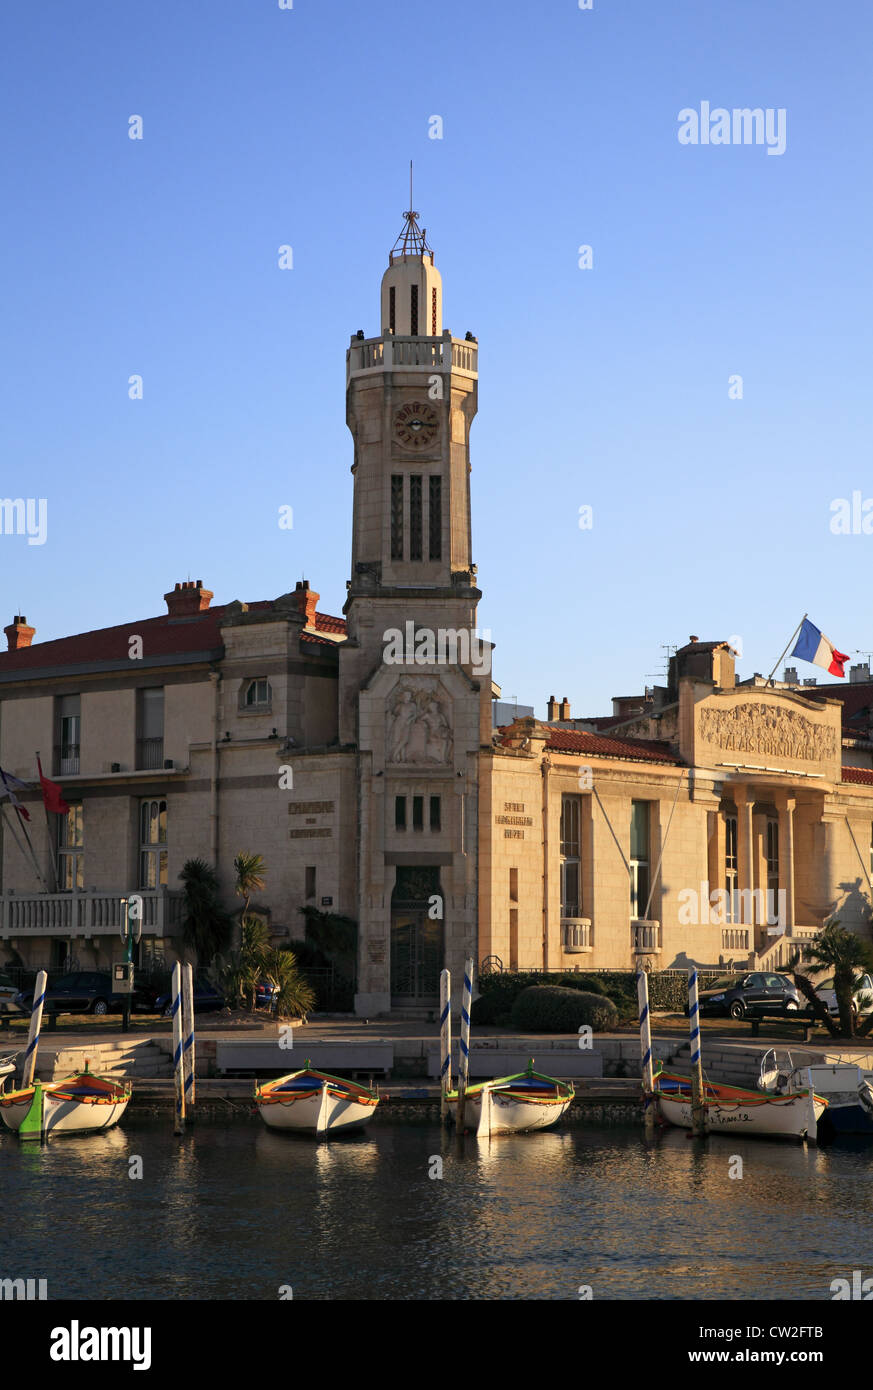 Consular Palace (Chamber of Commerce) in Sete, Languedoc Roussillon, France Stock Photo